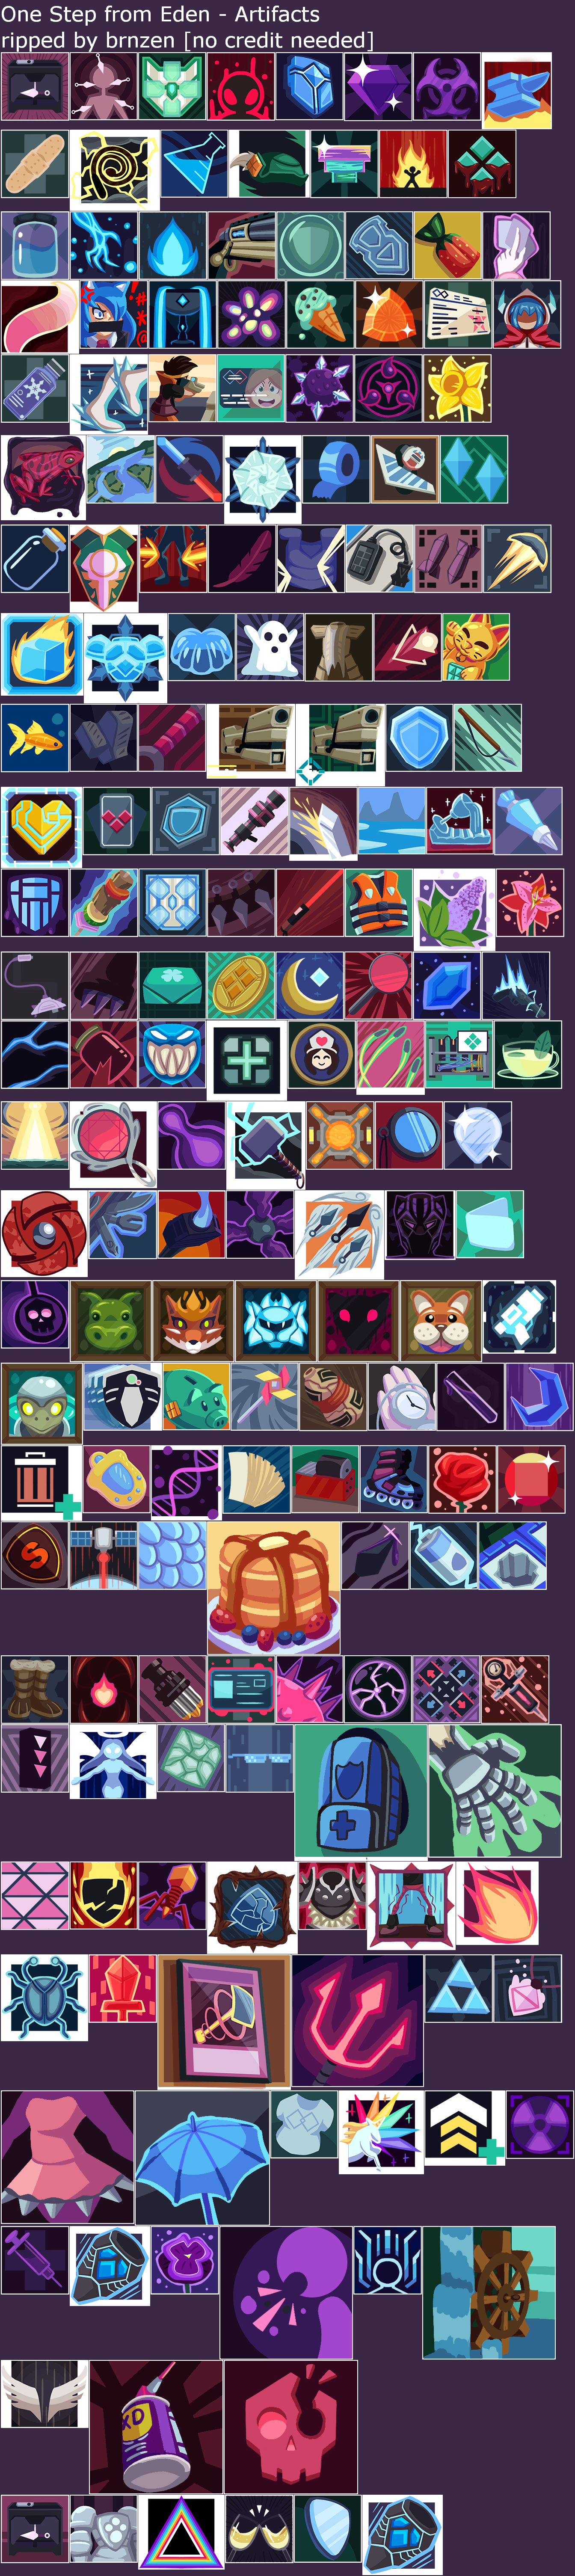 One Step from Eden - Artifact Icons